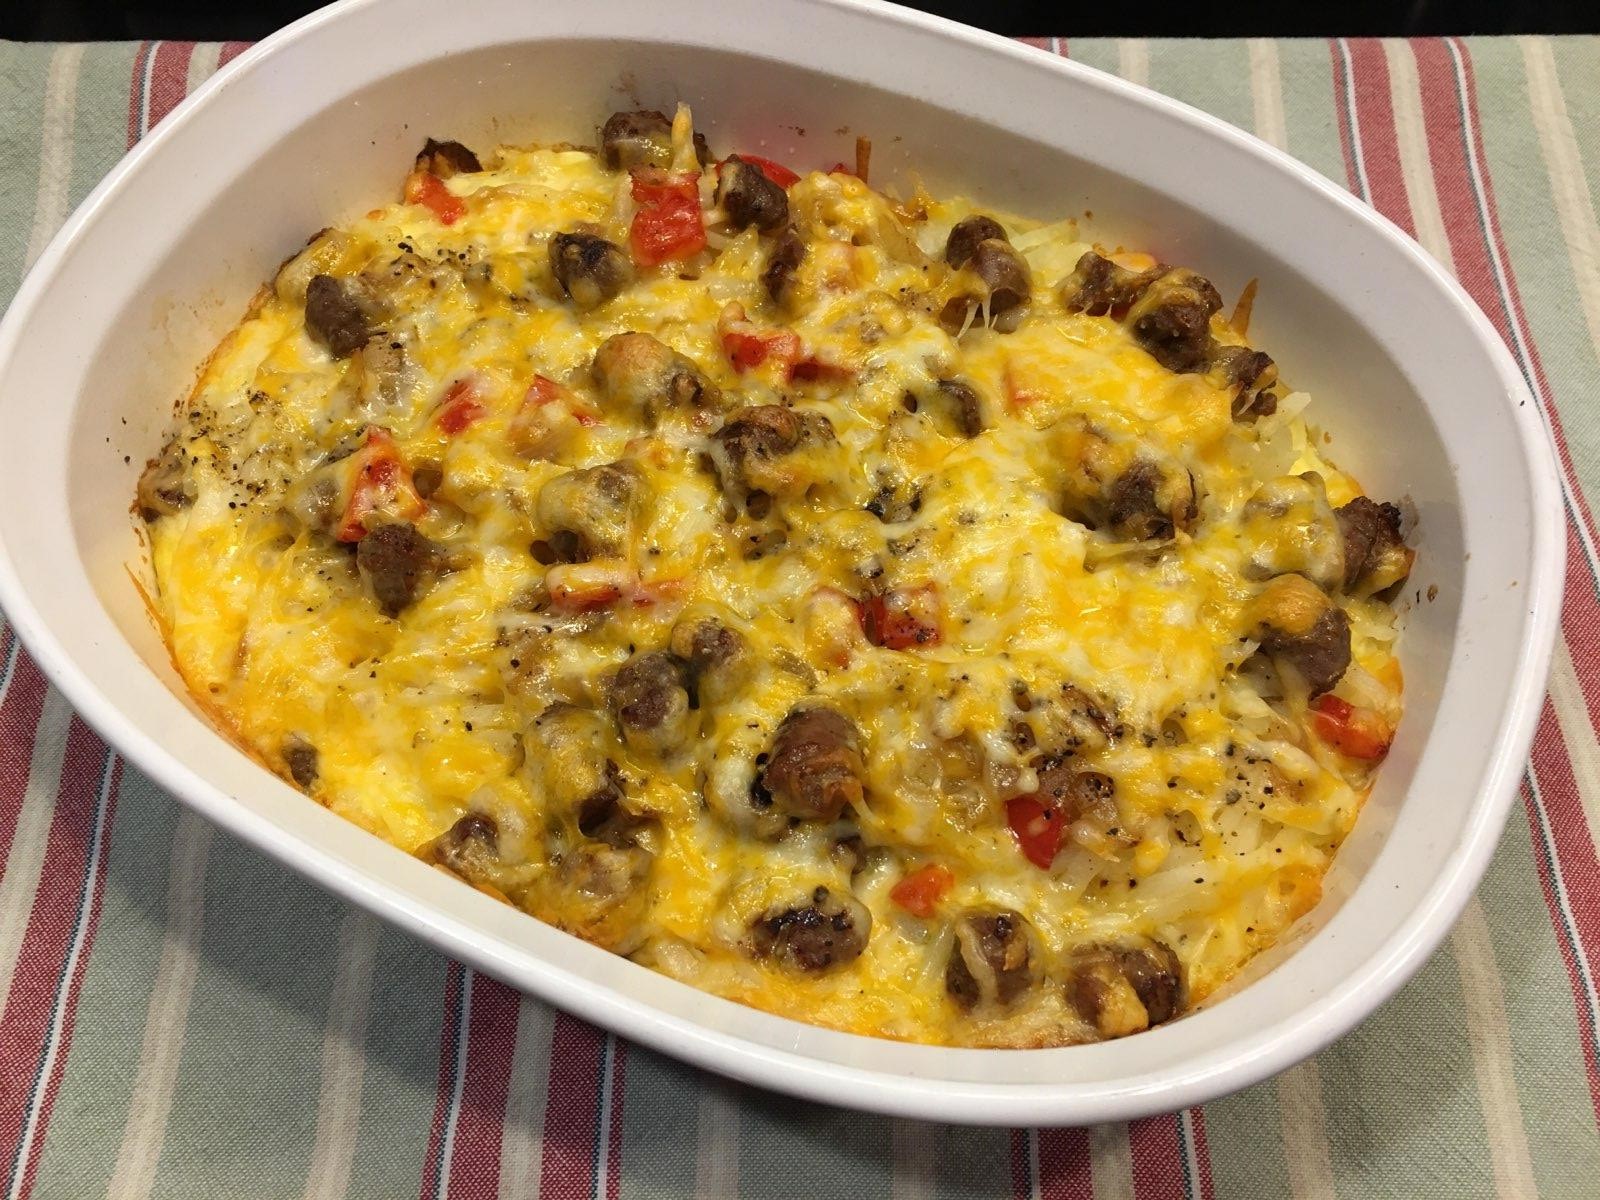 You can enjoy the Sausage, Potatoes and Cheese Breakfast Bake at any meal. (NDSU photo)